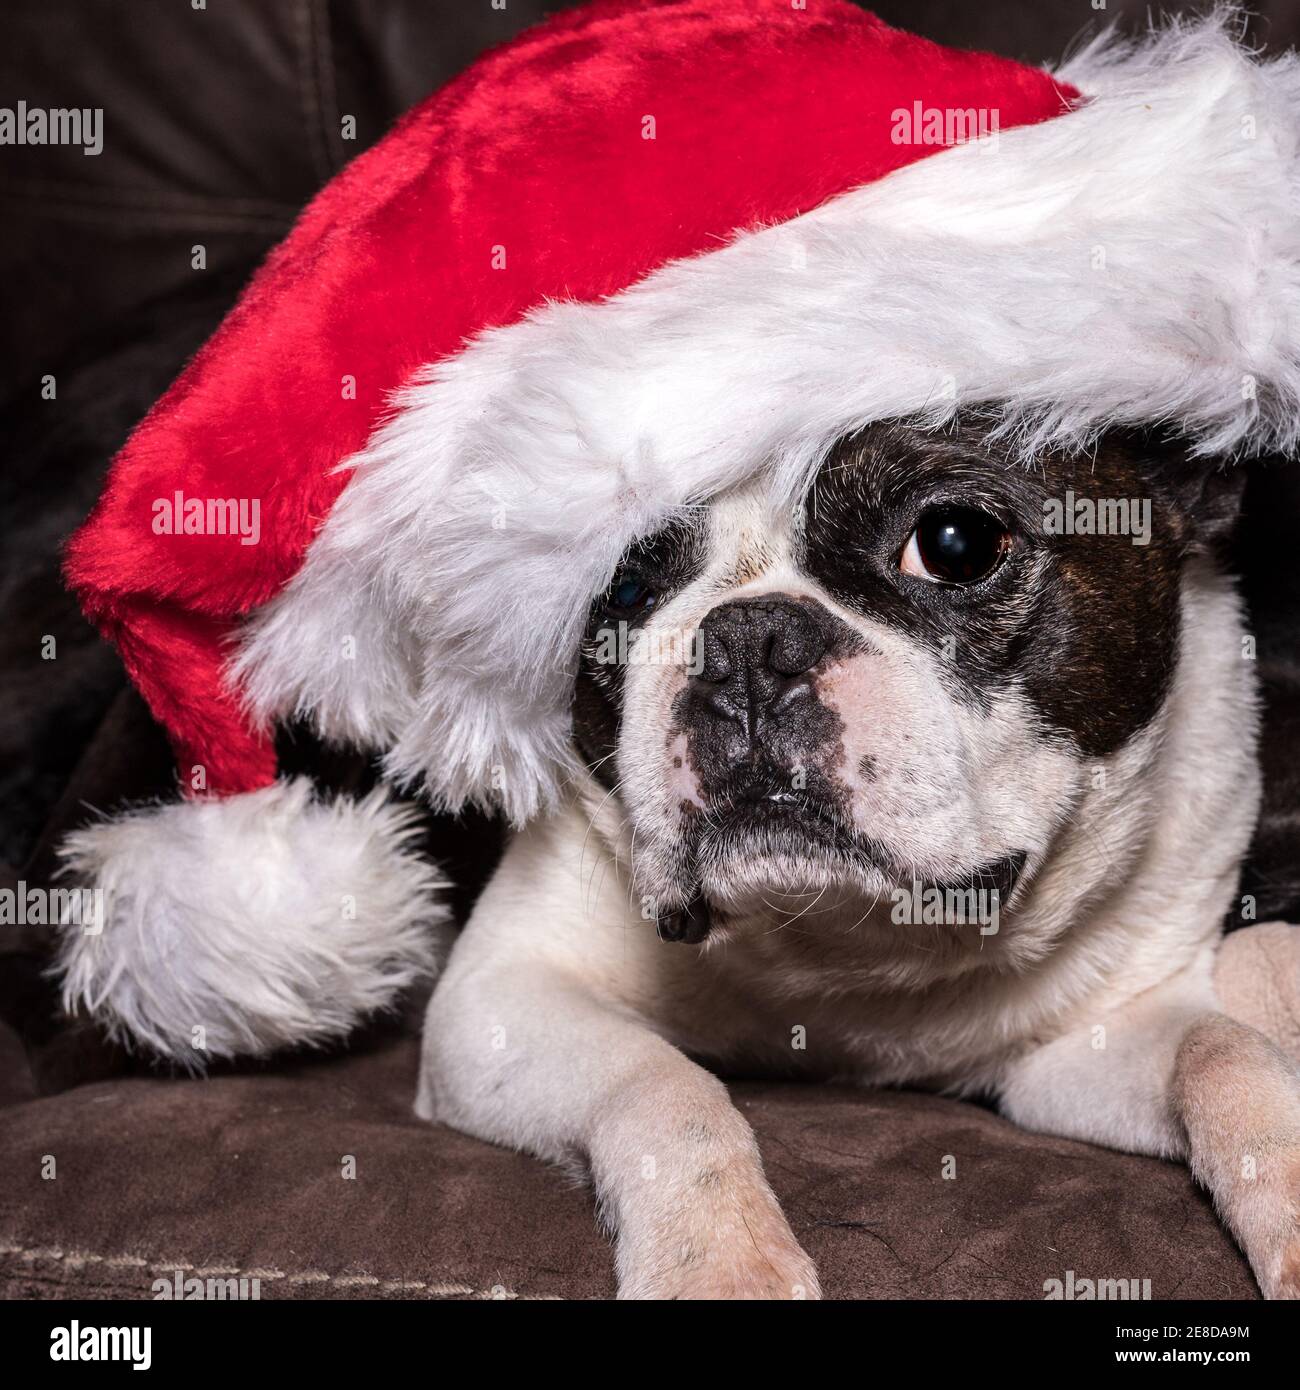 Aged Boston Terrier in a Santa Claus hat lying on a leather couch - square format Stock Photo